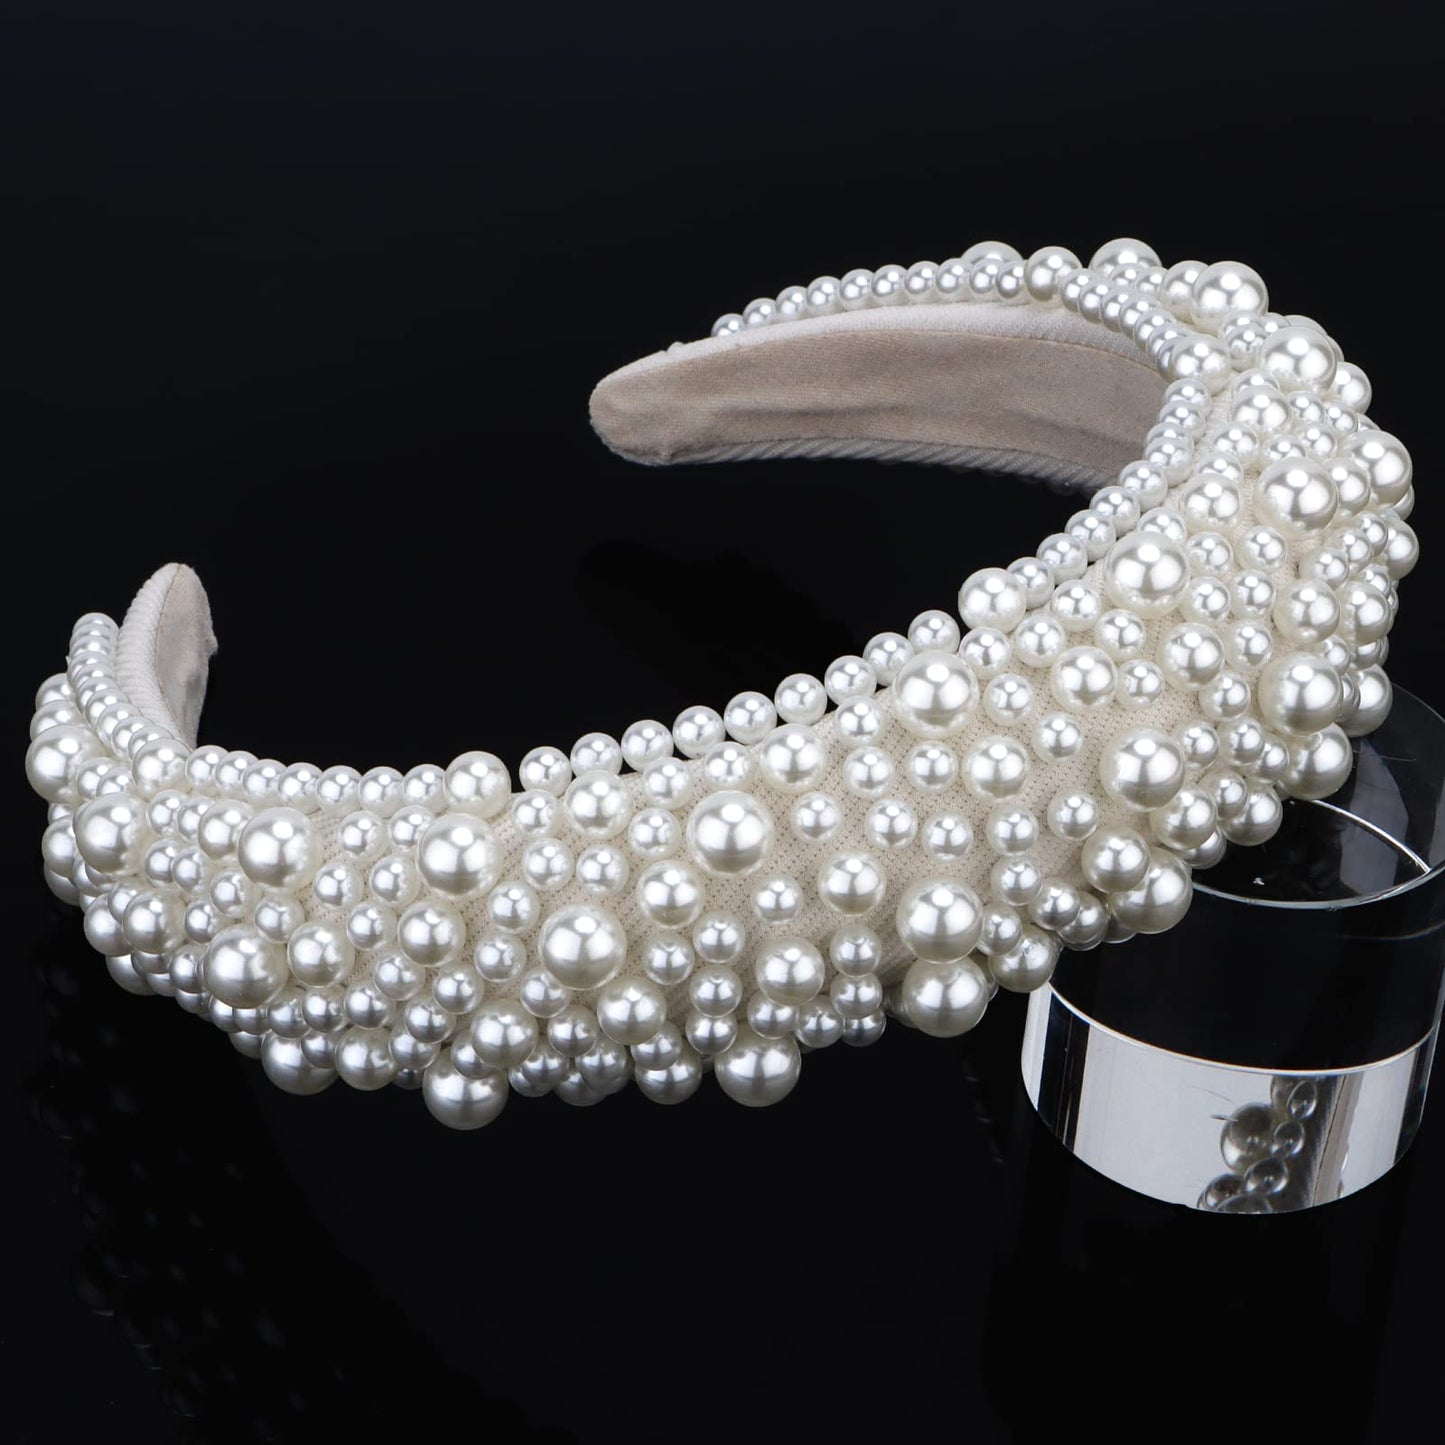 Hapdoo White Pearl Headbands for Women Girls, Cute Puffy Padded Headband with Faux Pearl for Wedding Bride Fashion, Wide Thick Beaded Bling Hairbands Hair Hoop Accessories for Birthday